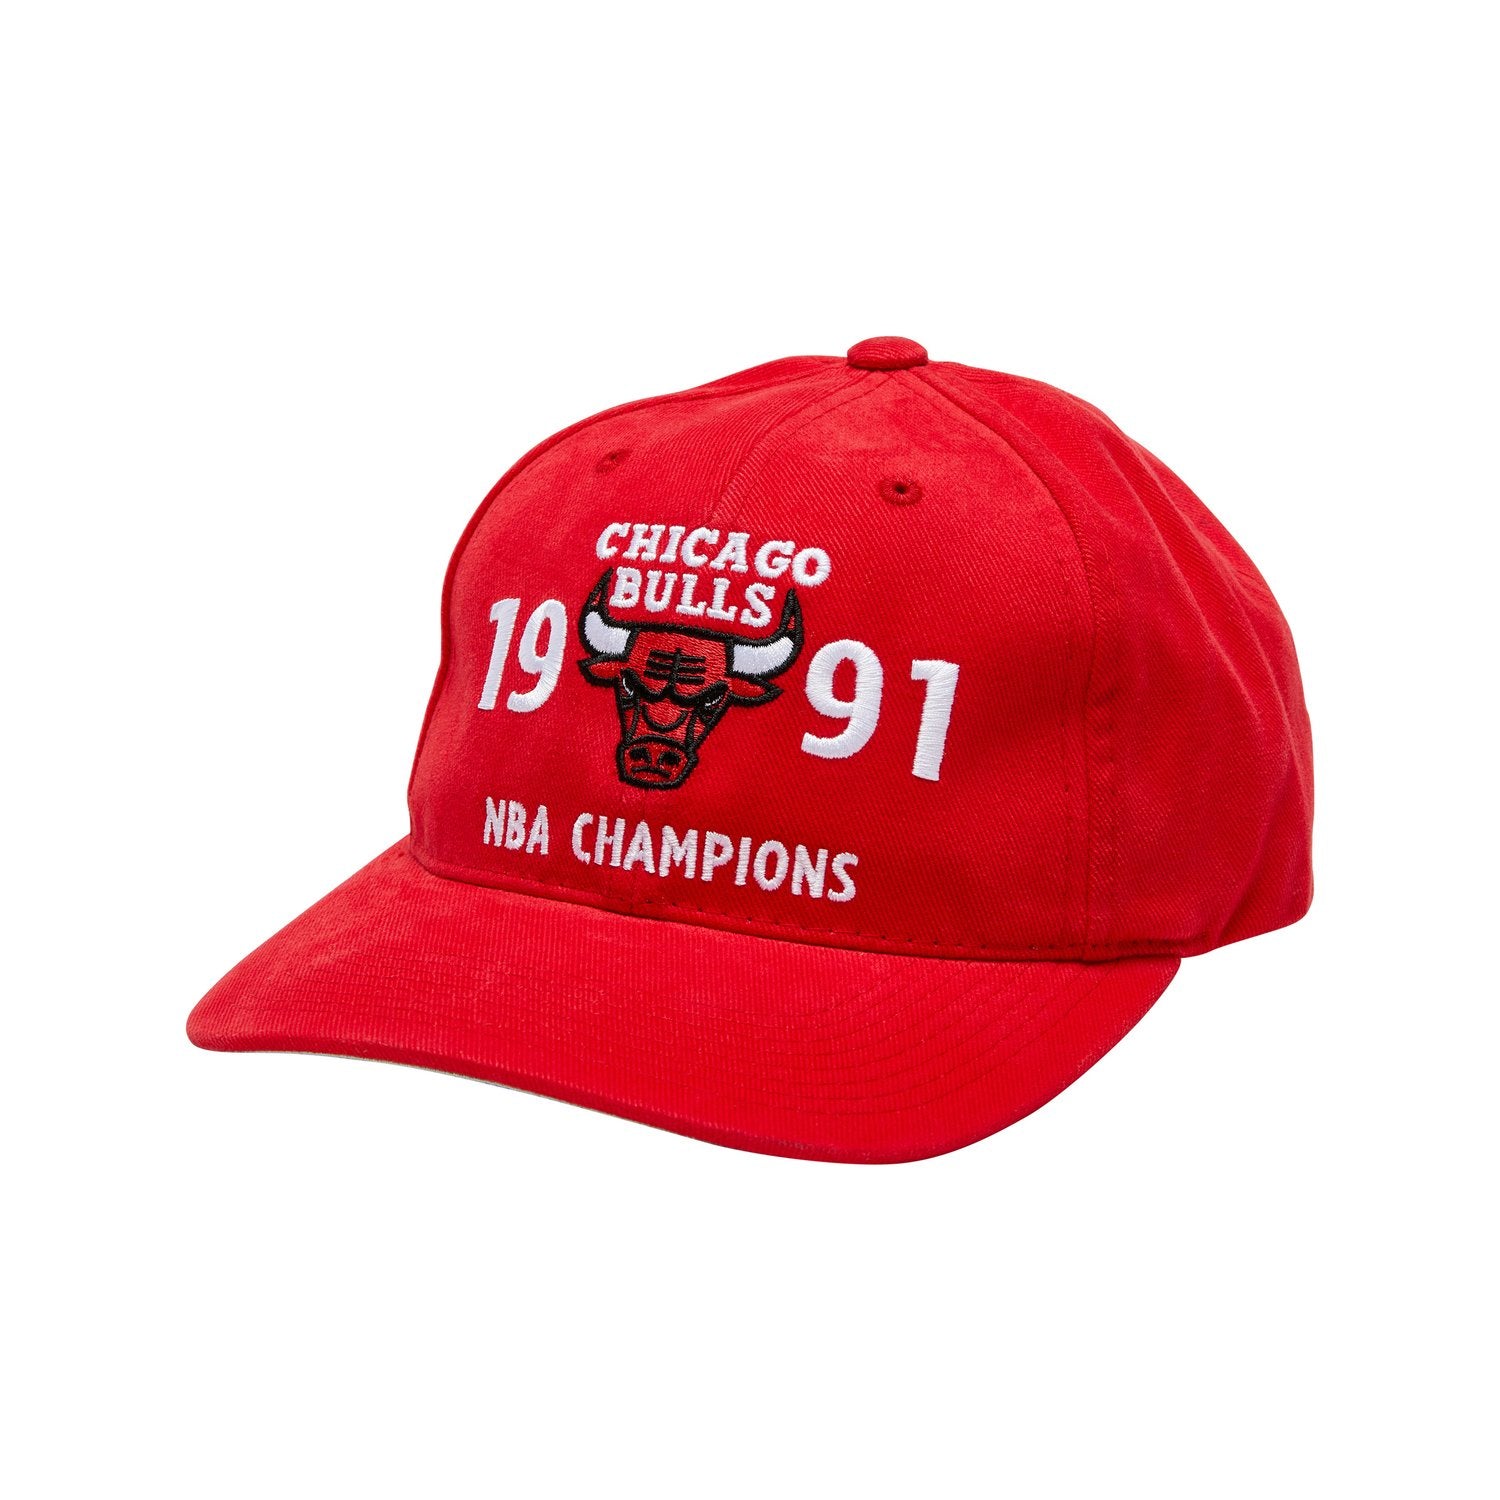 MITCHELL & NESS CHICAGO BULLS FINALS HISTORY DEADSTOCK SNAPBACK 1991